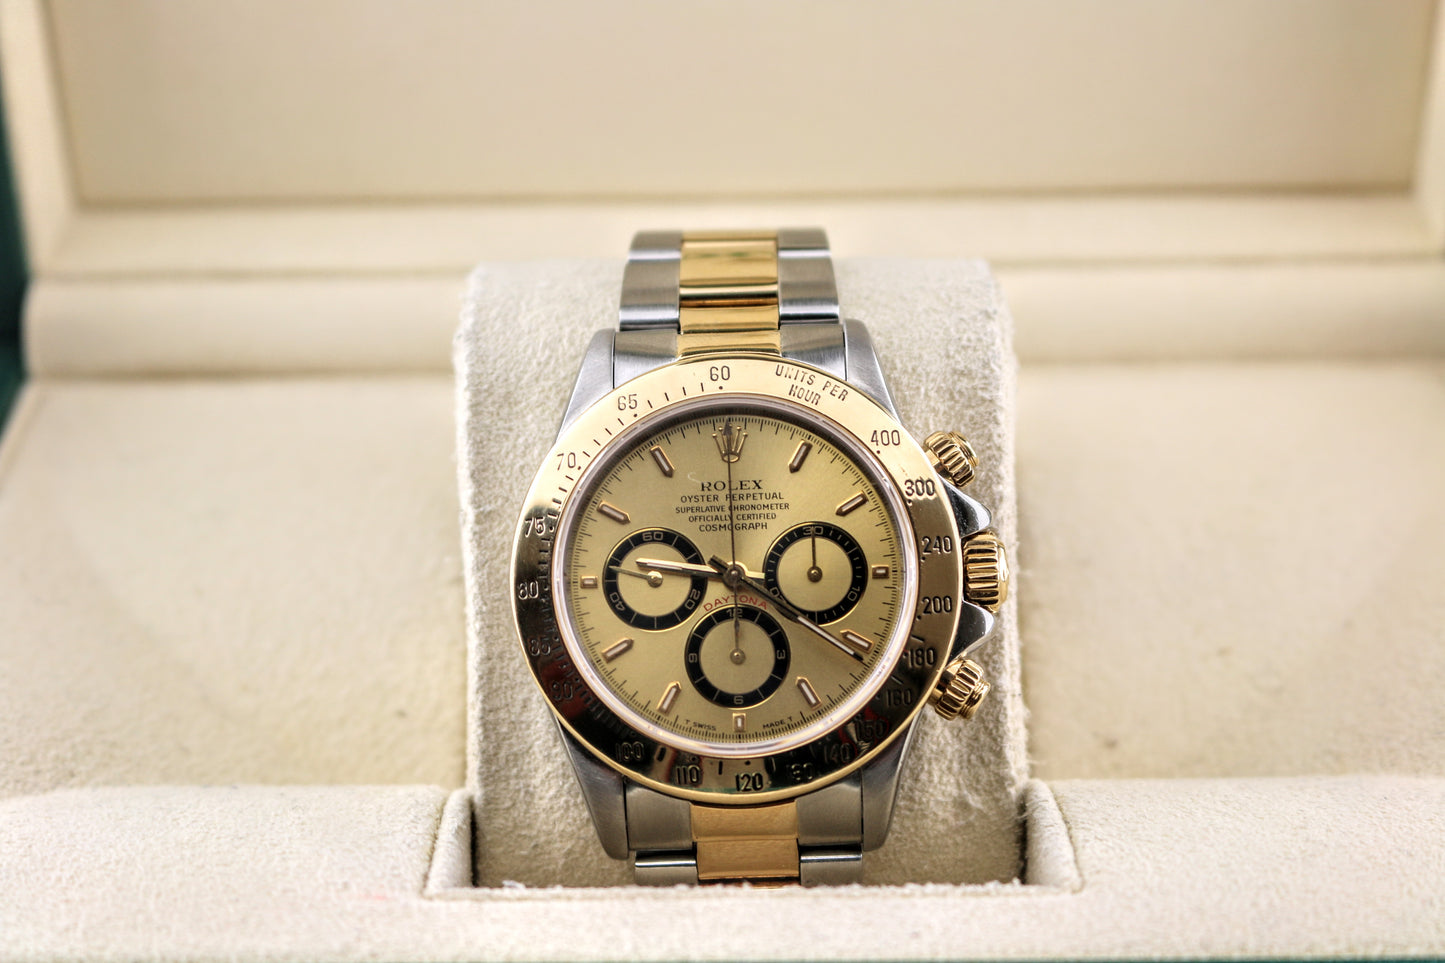 1995 Rolex Daytona 16523 Champagne Dial TT Oyster No Papers 40mm